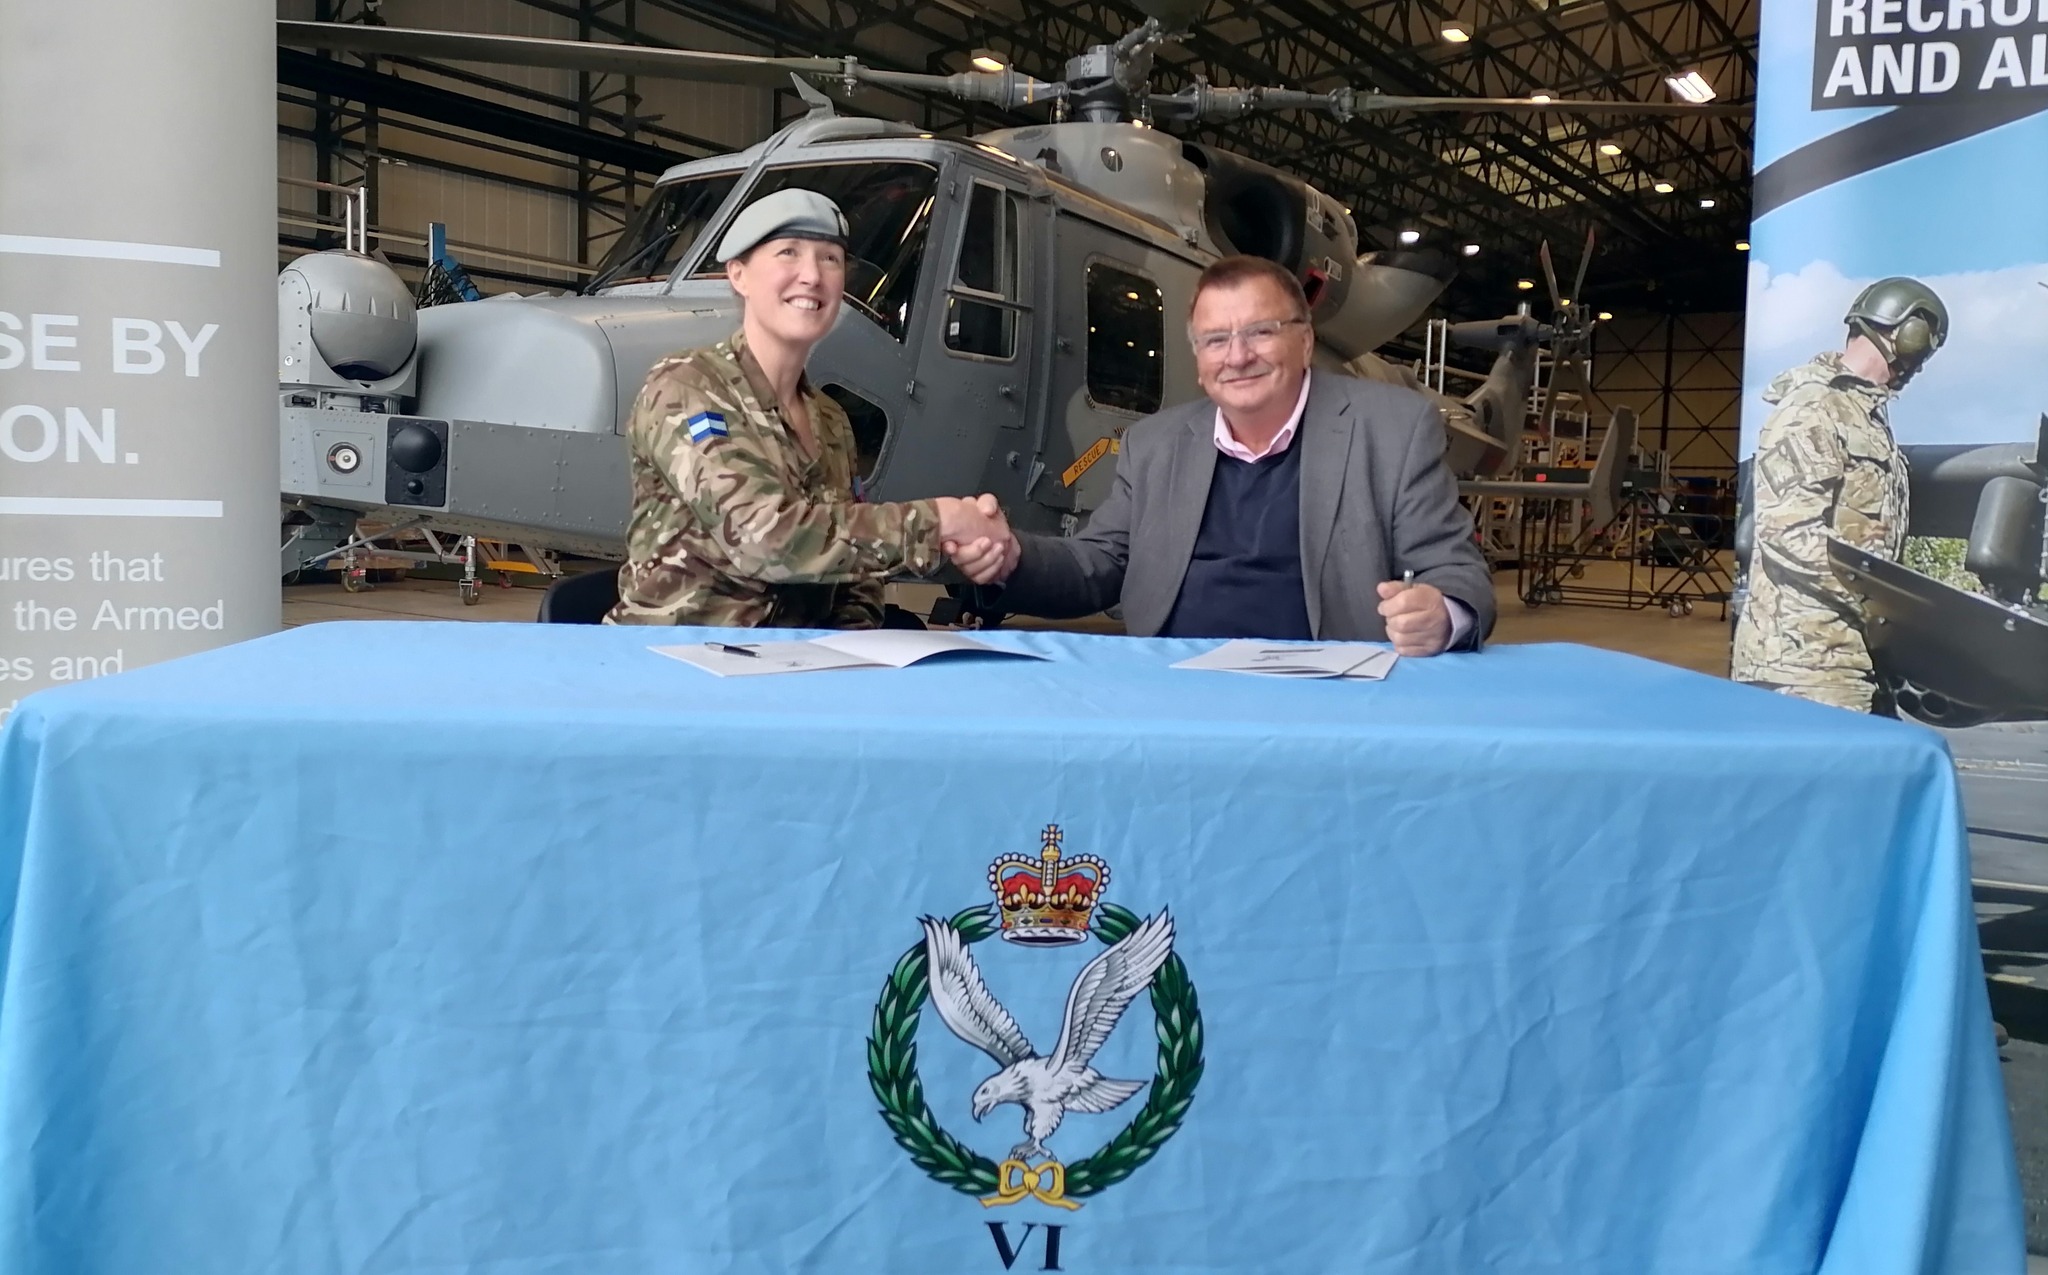 Lt Col Alice Archer and the representative for Armishaws Removals shake hands over the signed armed forces covenant pledge with an army helicopter in the background